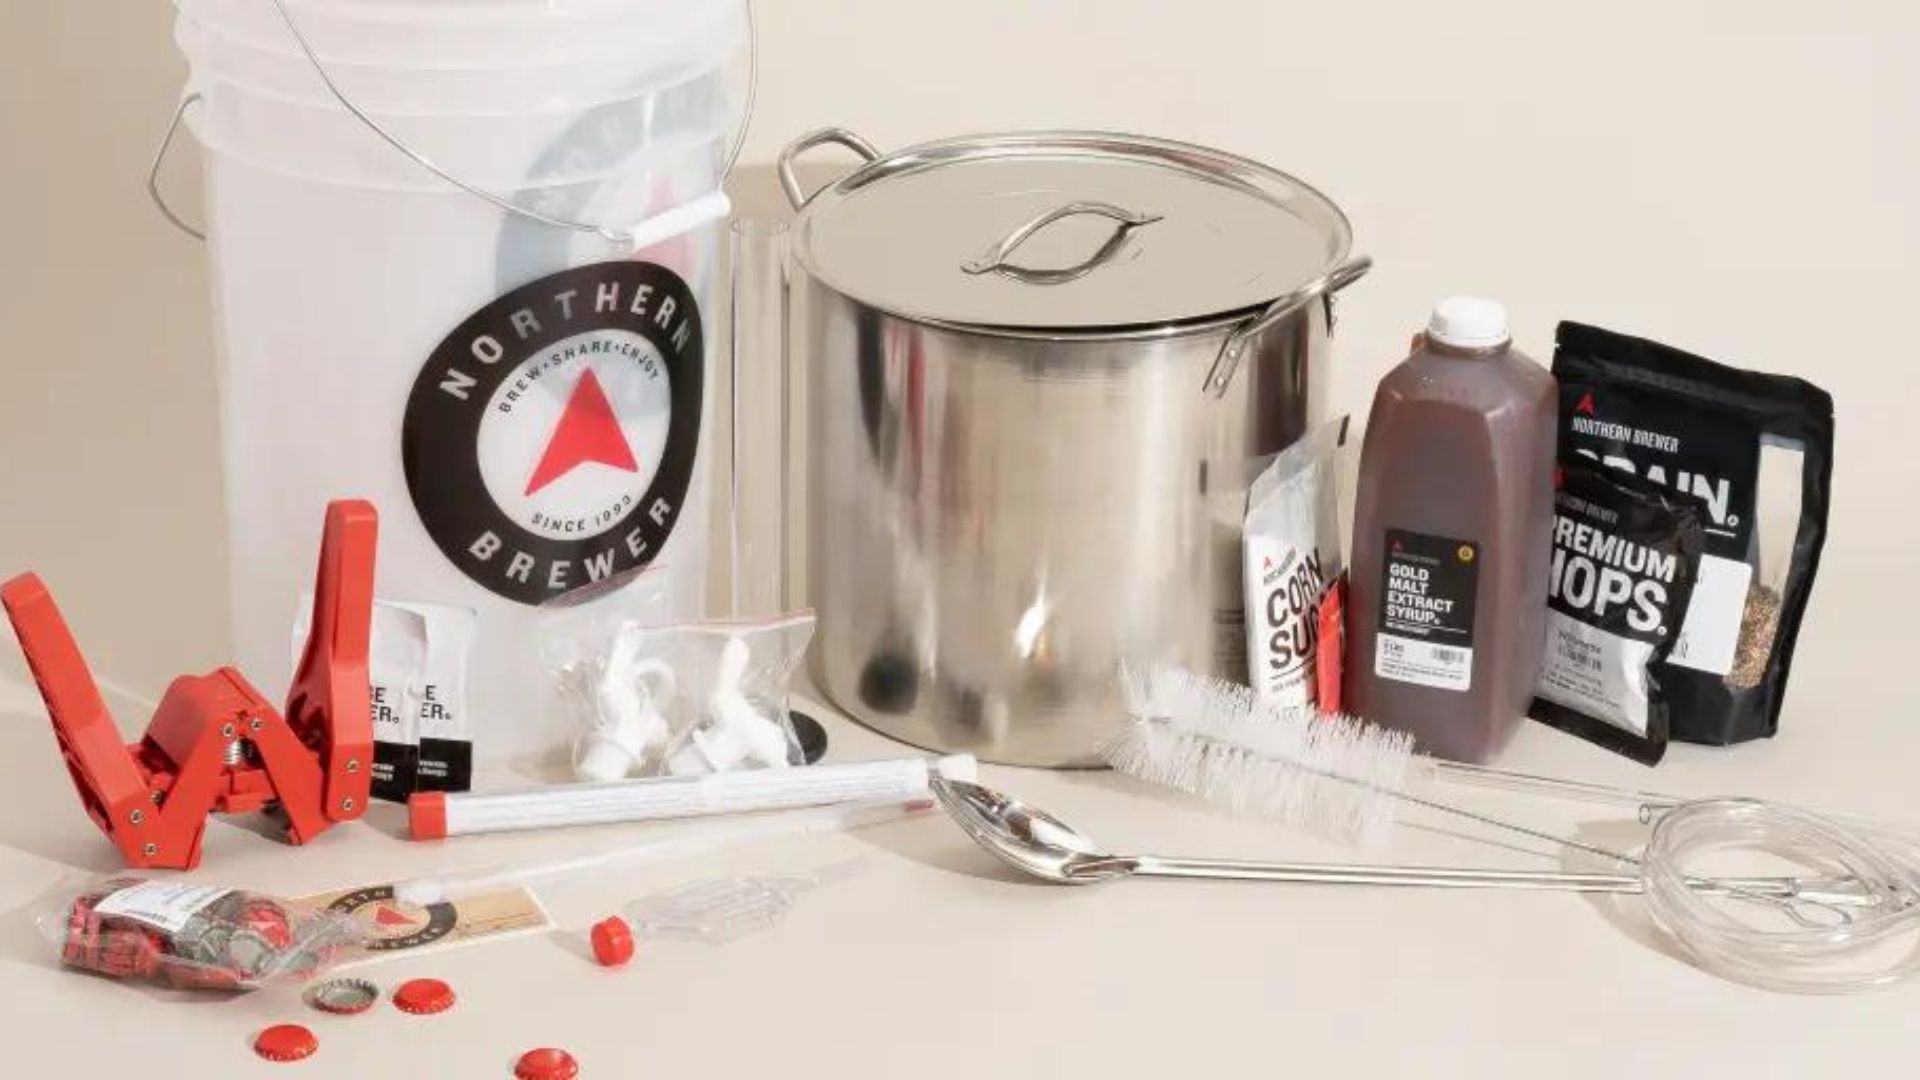 this image shows Beer Brewing Kits